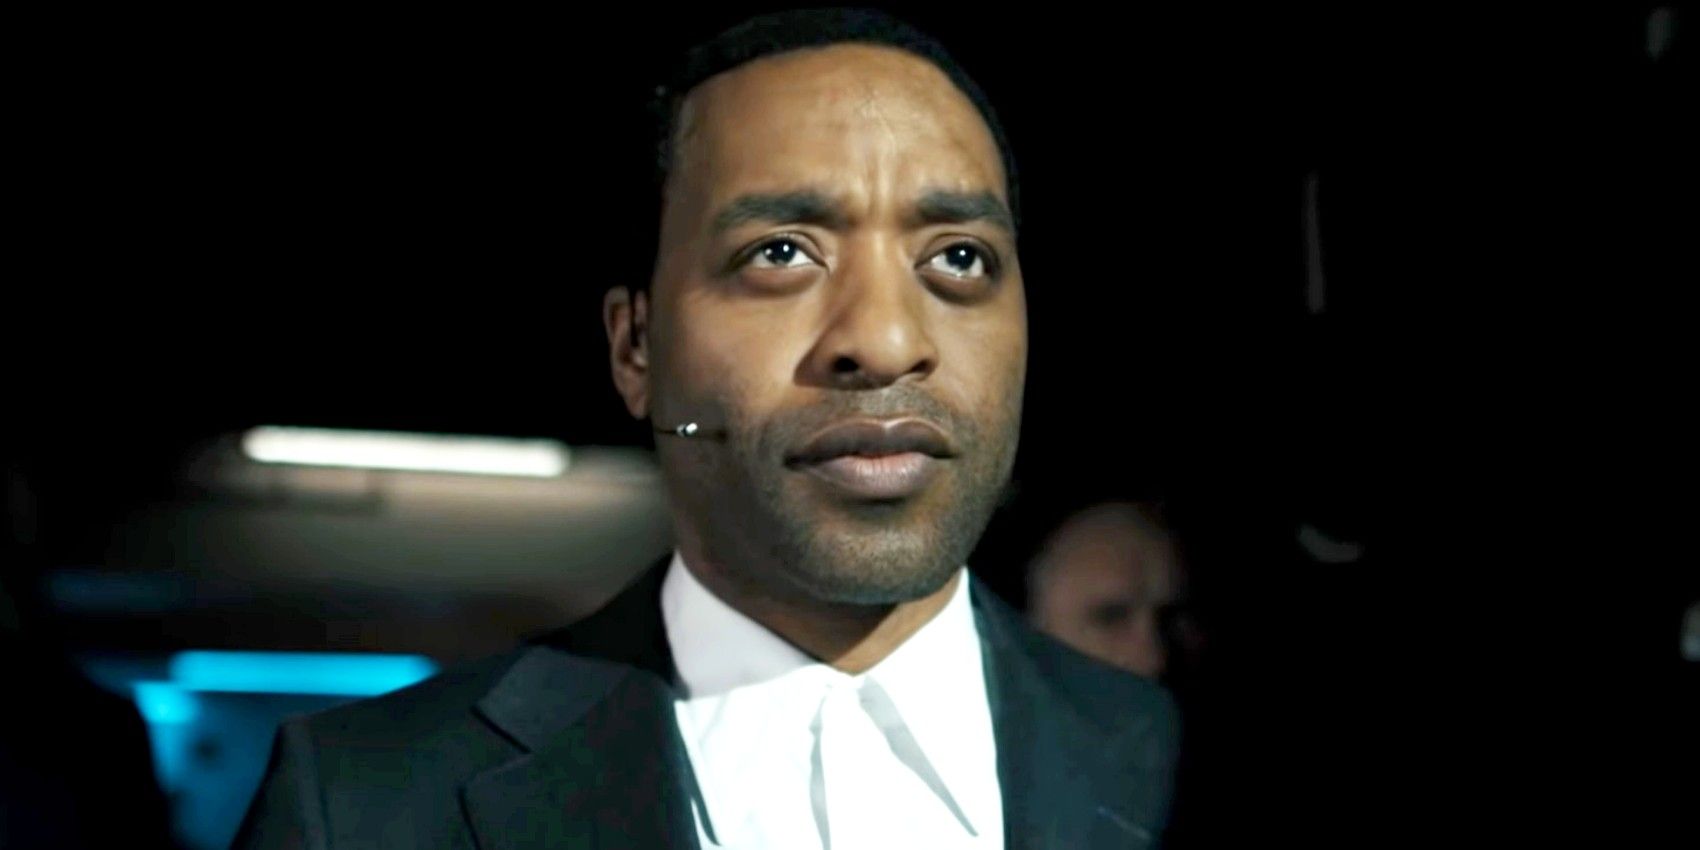 Chiwetel Ejiofor in The Man Who Fell to Earth